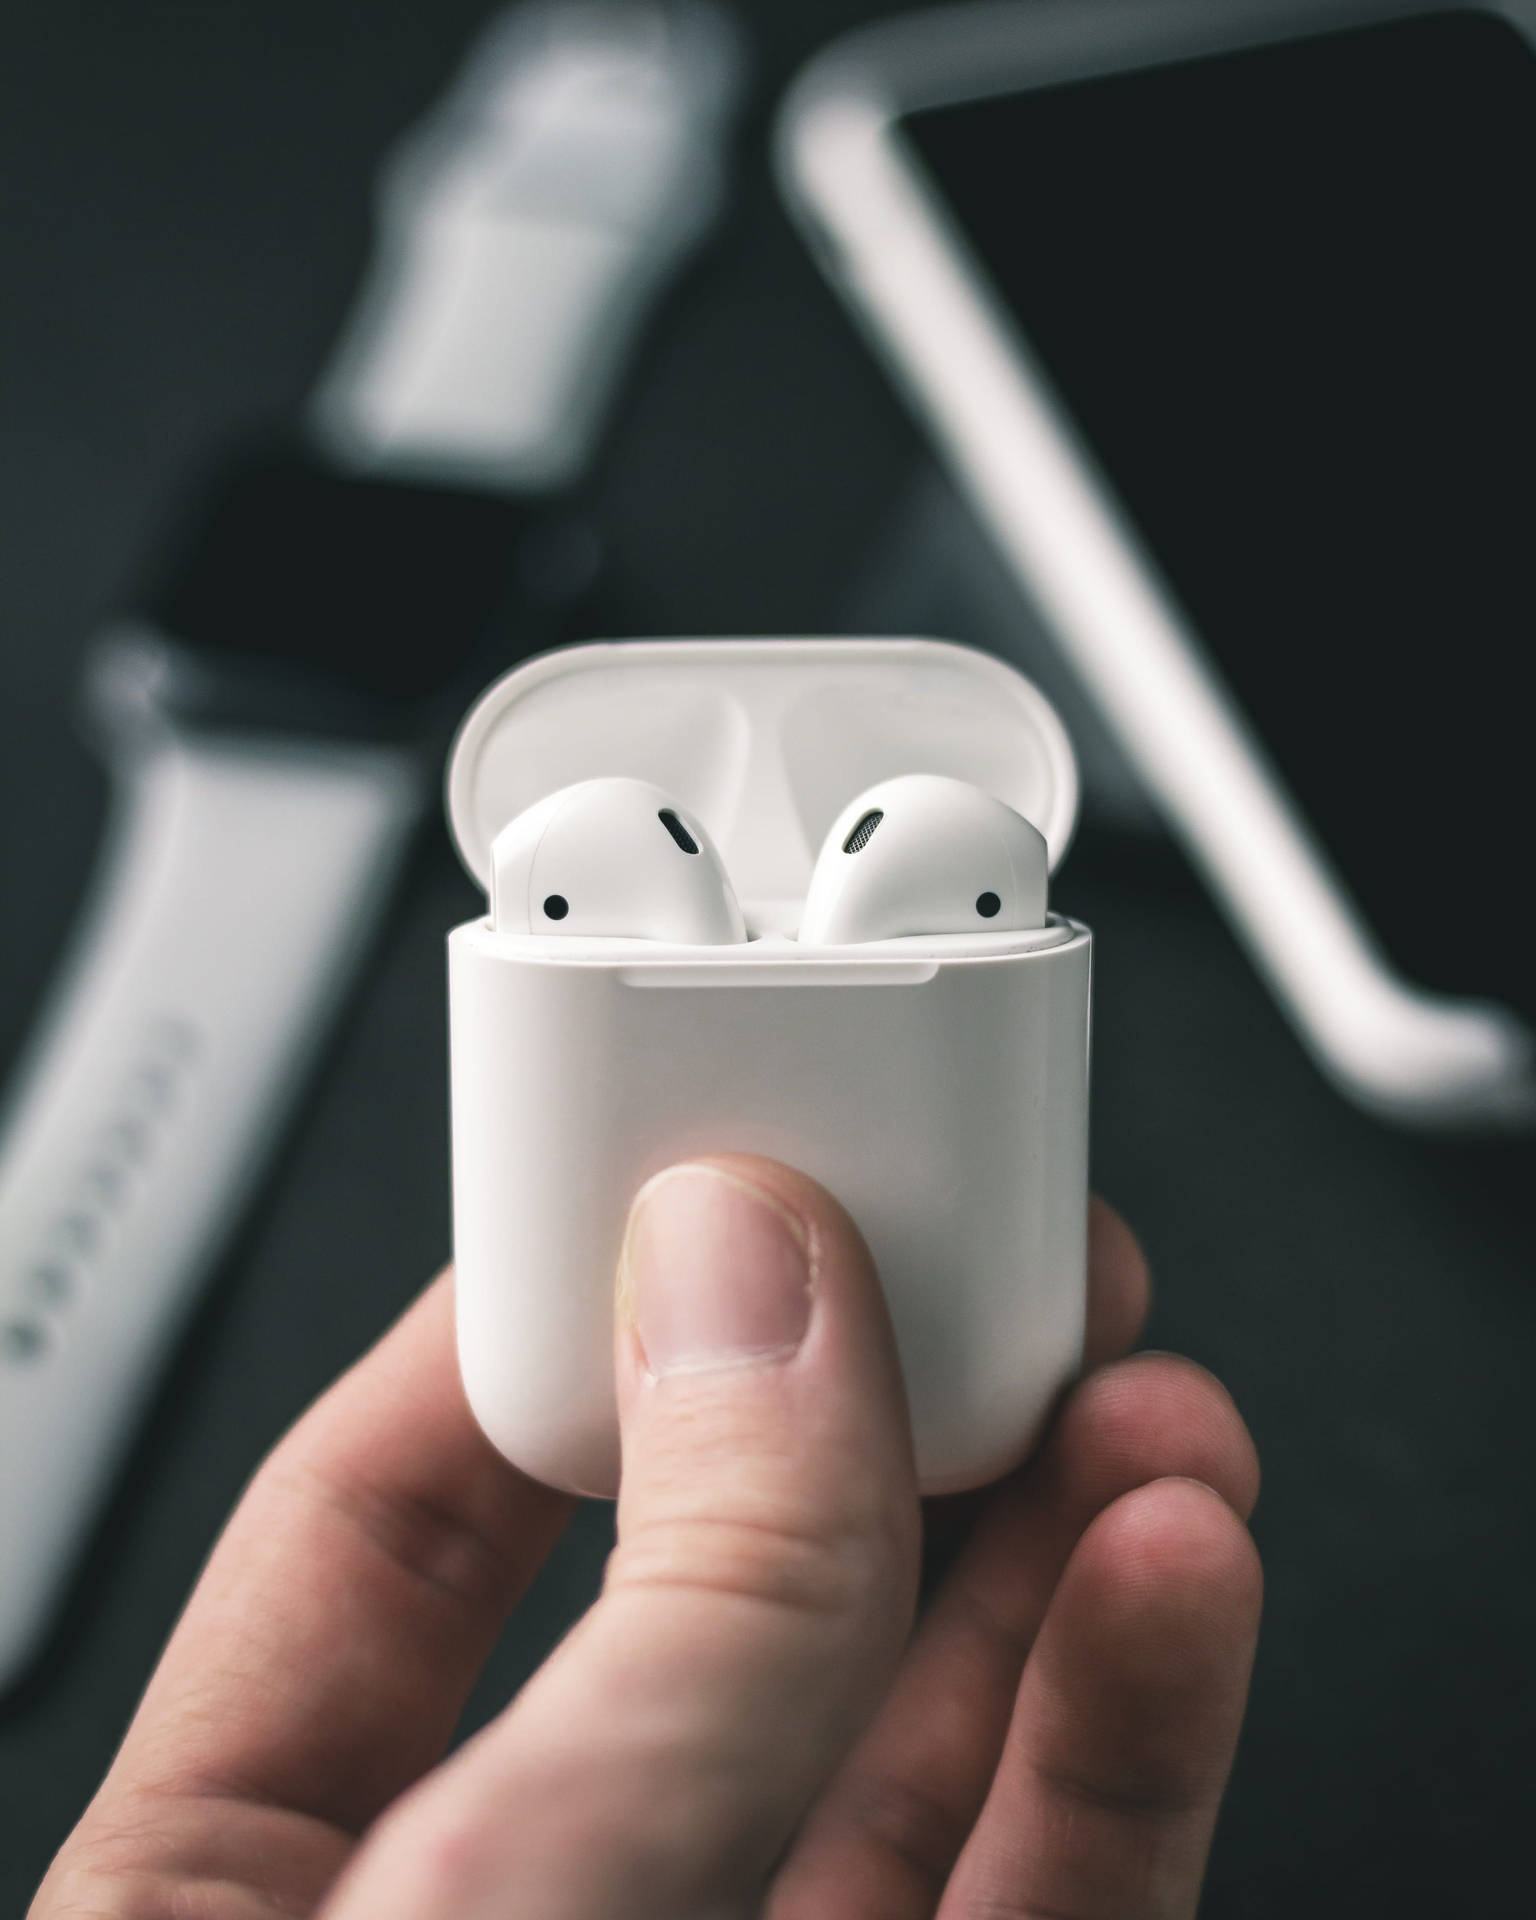 Apple AirPods With Gadgets Wallpaper